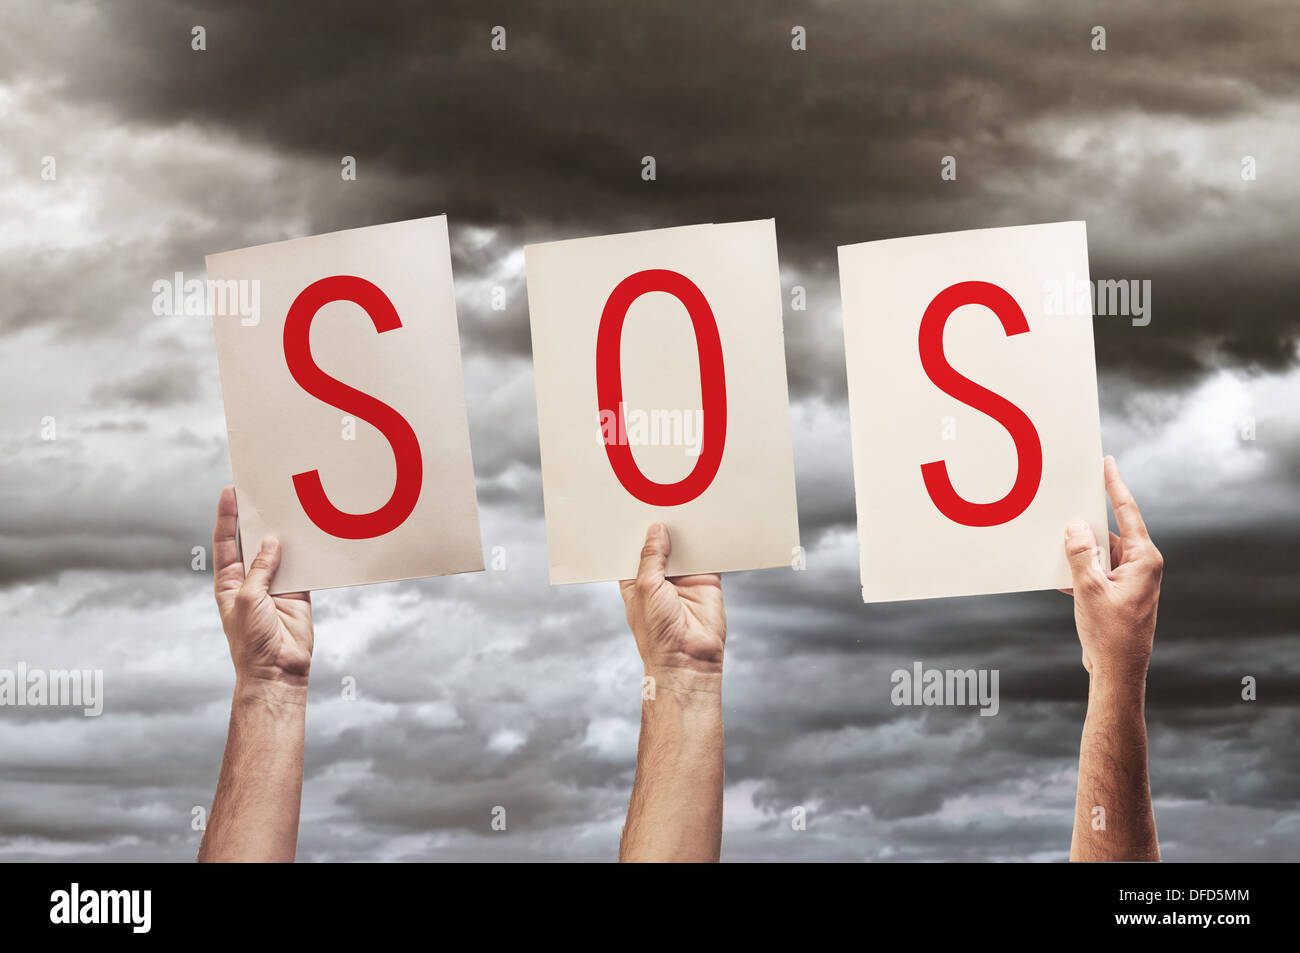 SOS message, save our souls. Human hands holding papers with printed letters SOS. Stock Photo